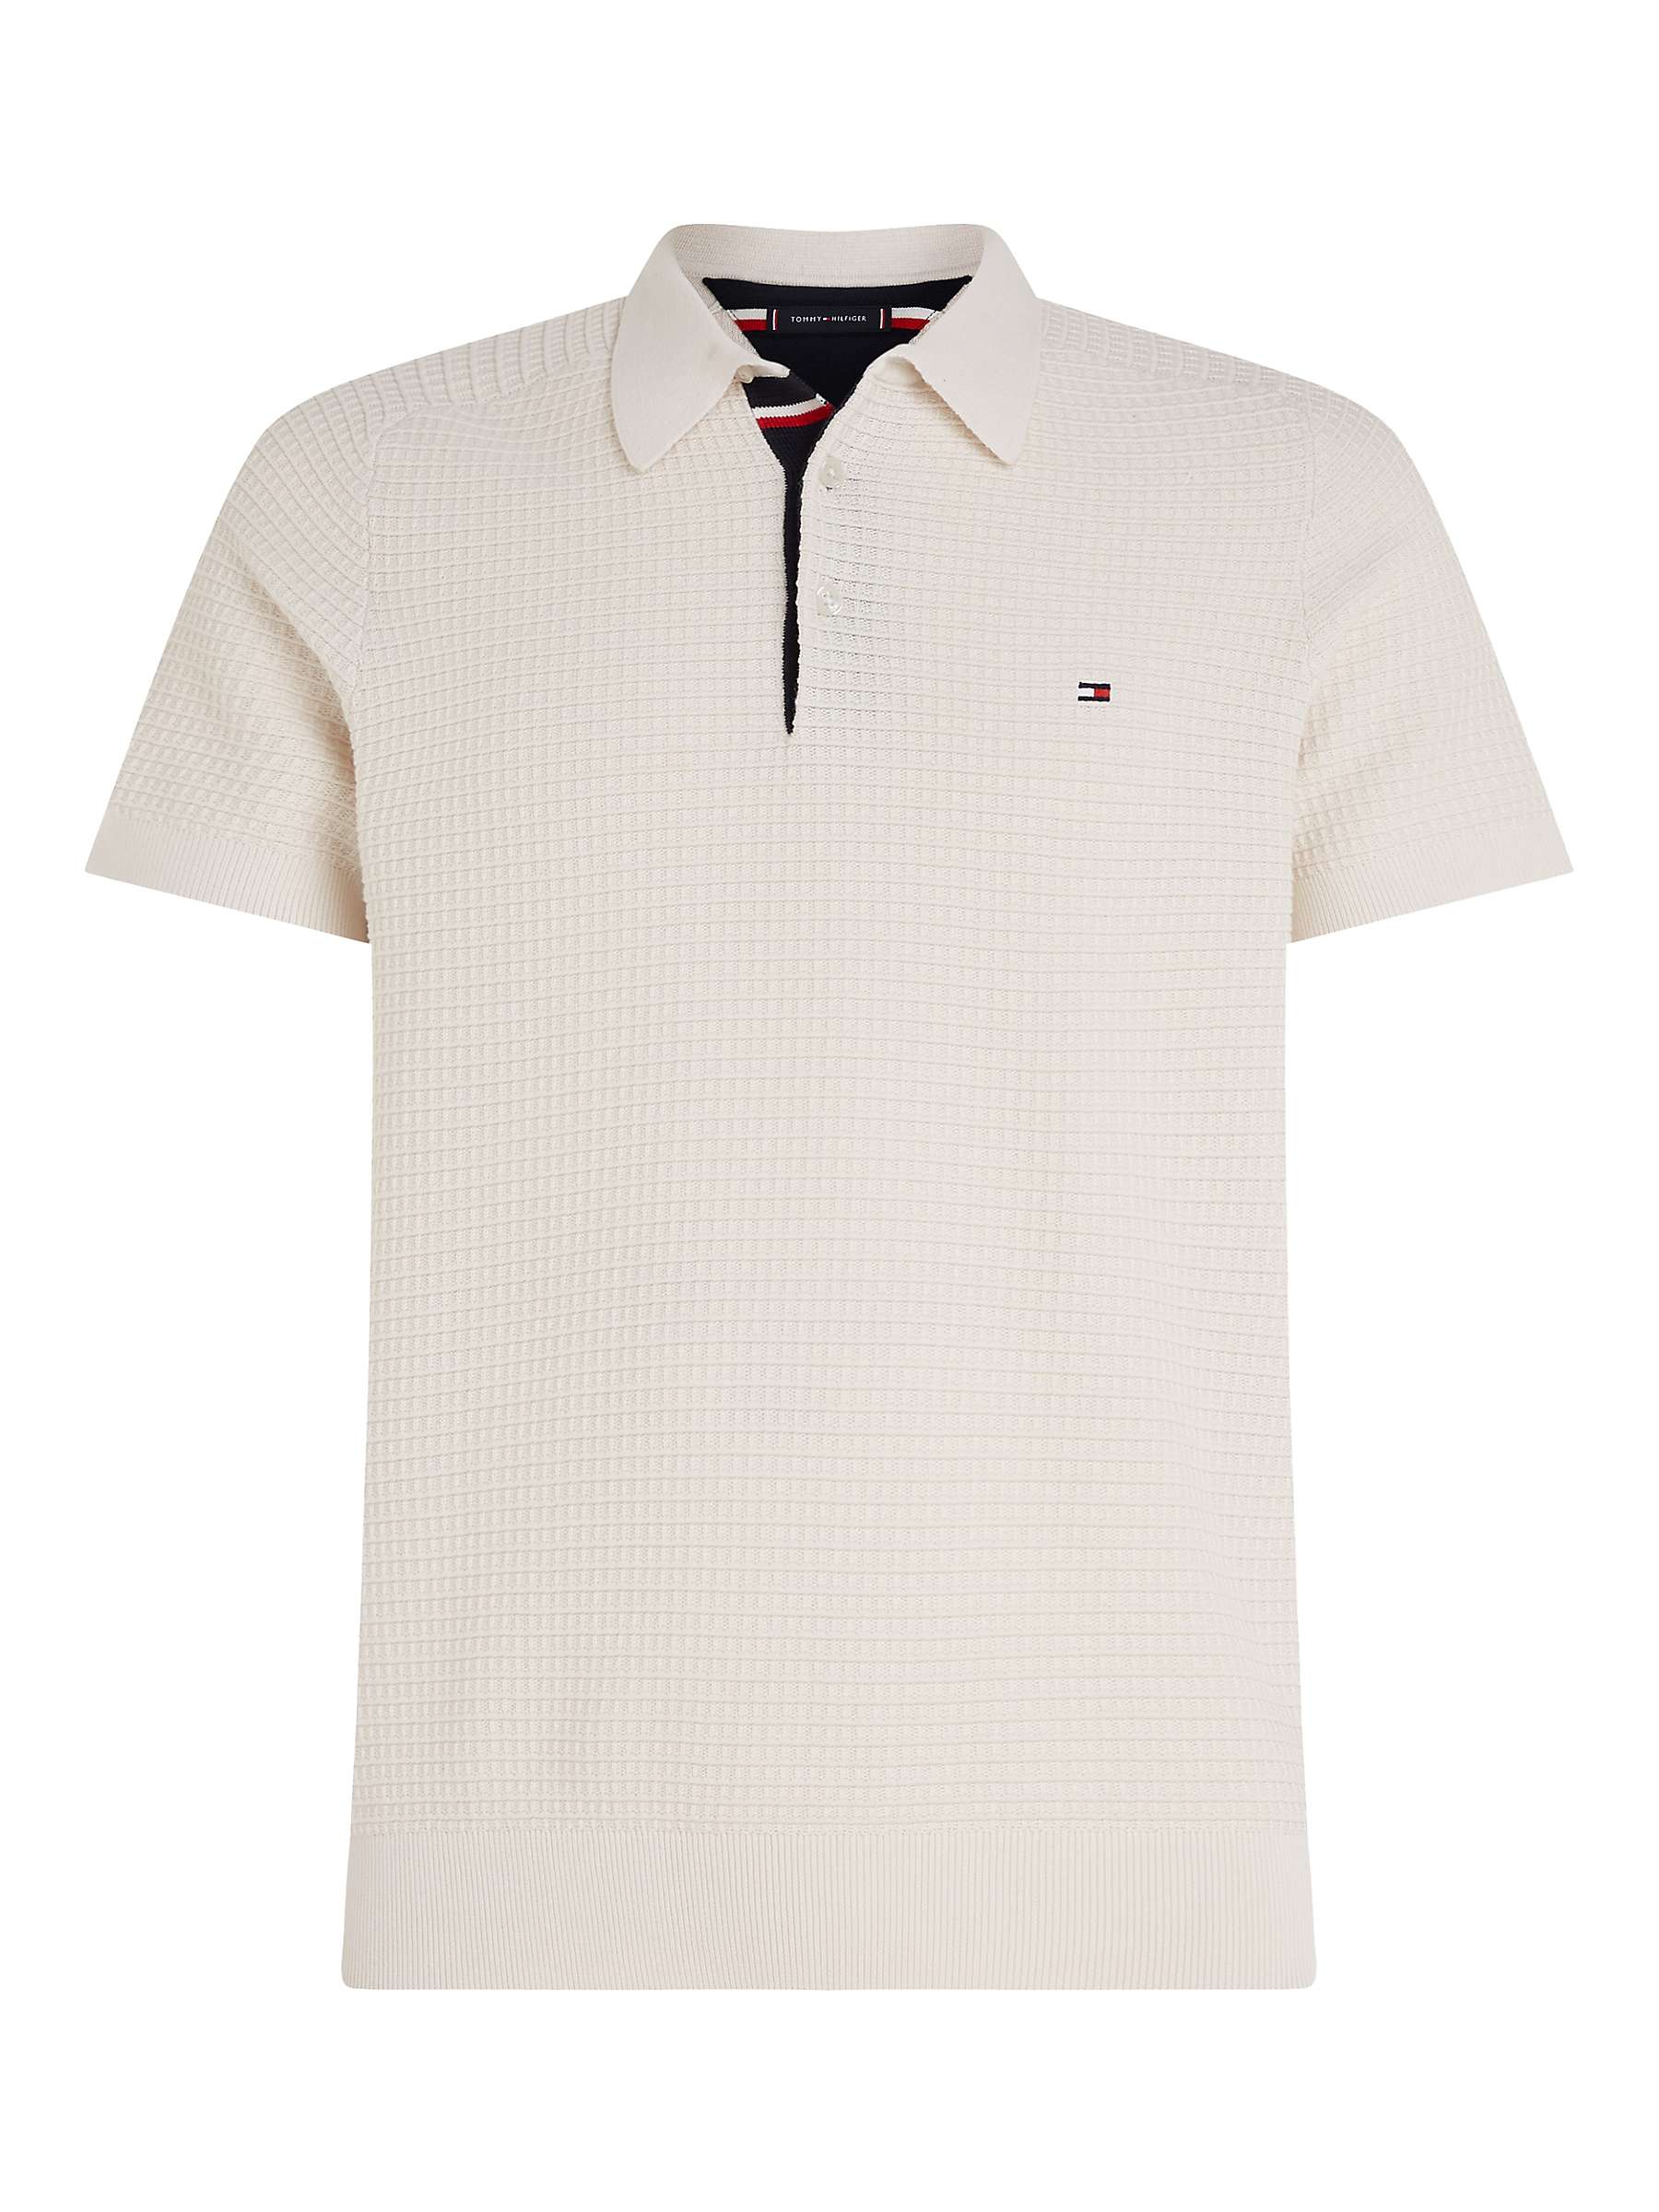 Tommy Hilfiger Textured Organic Cotton Spring Polo Shirt, Weathered ...